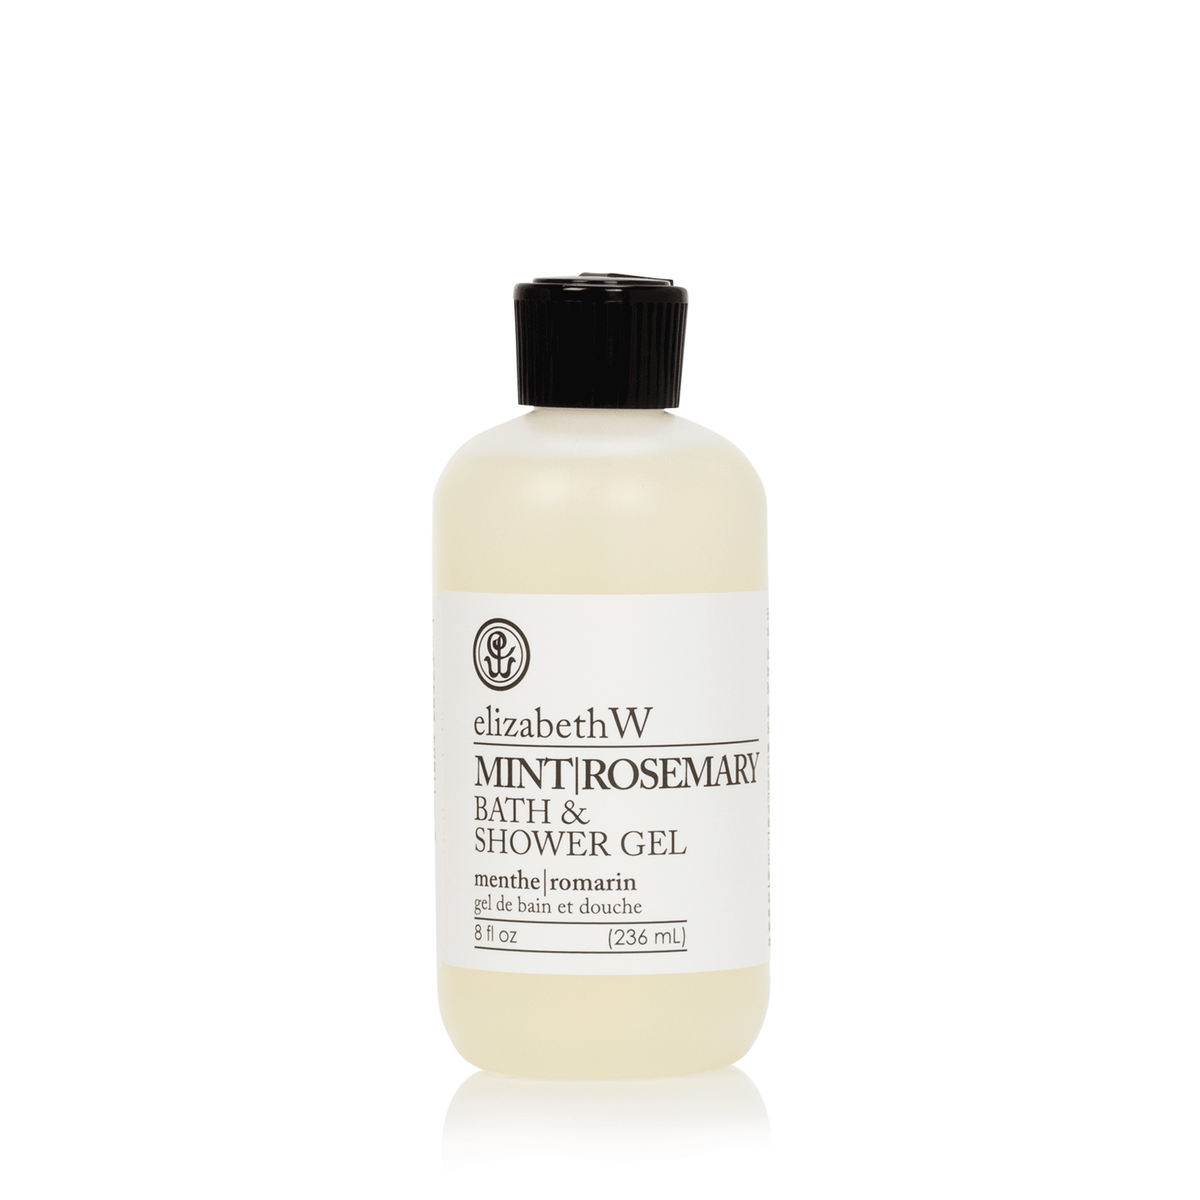 A bottle of Elizabeth W Purely Essential Mint Rosemary Bath & Shower Gel, labeled, with a black cap, isolated on a white background.